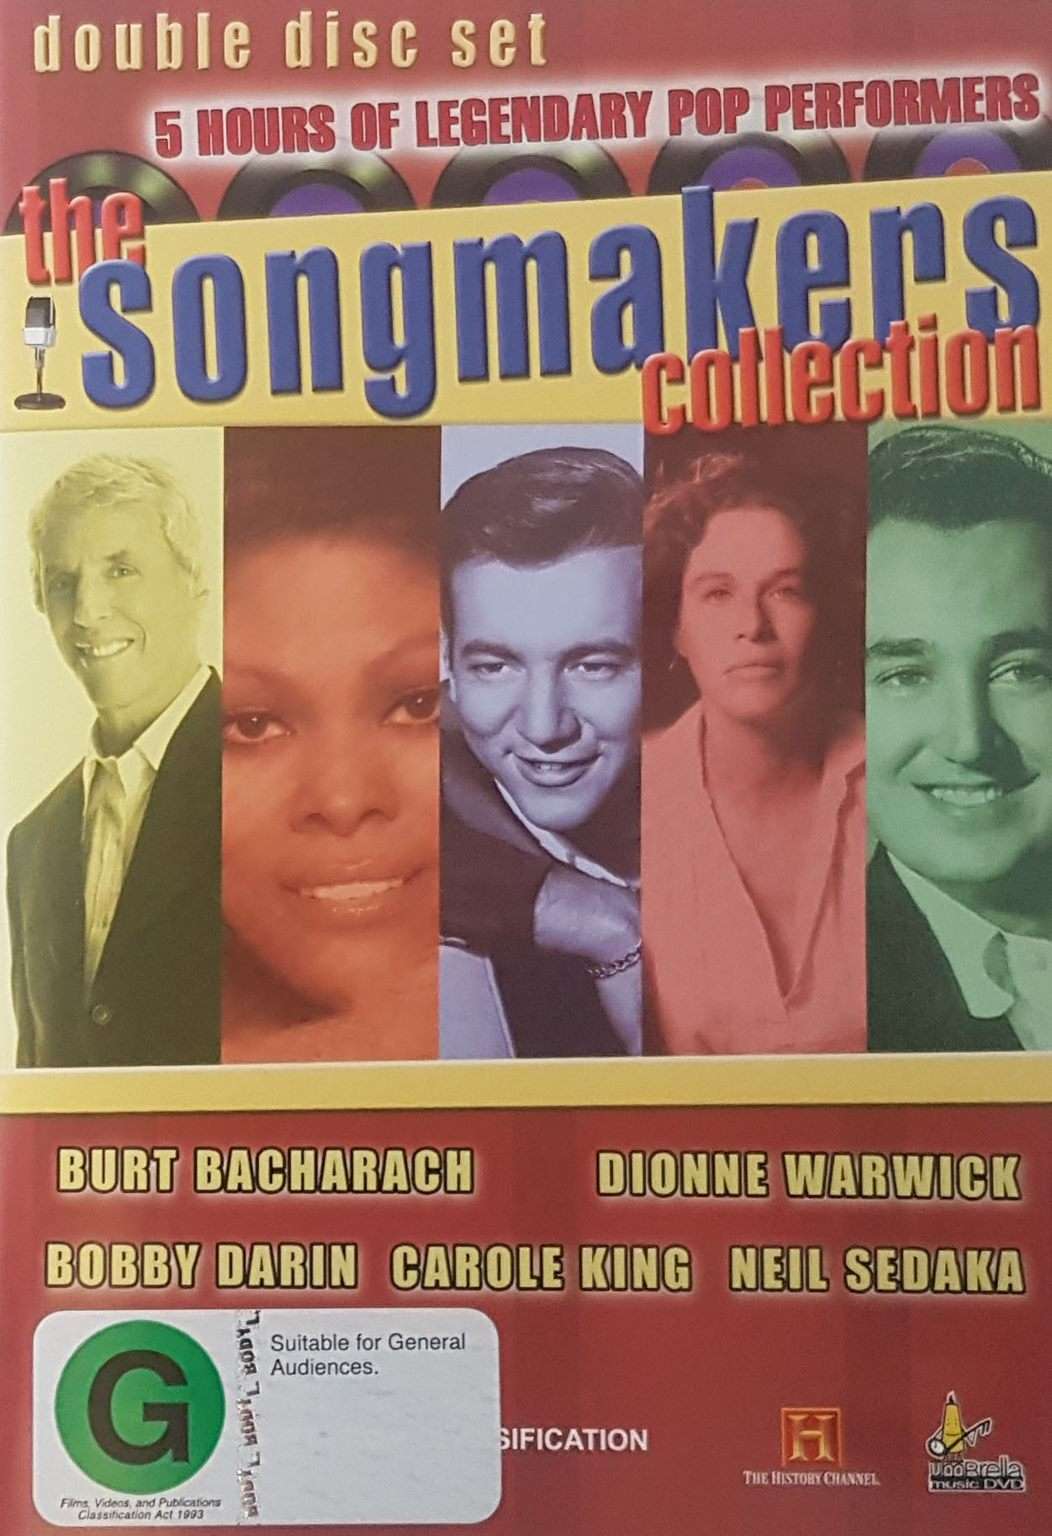 The Songmakers Collection 5 Hours of Legendary Pop Performers